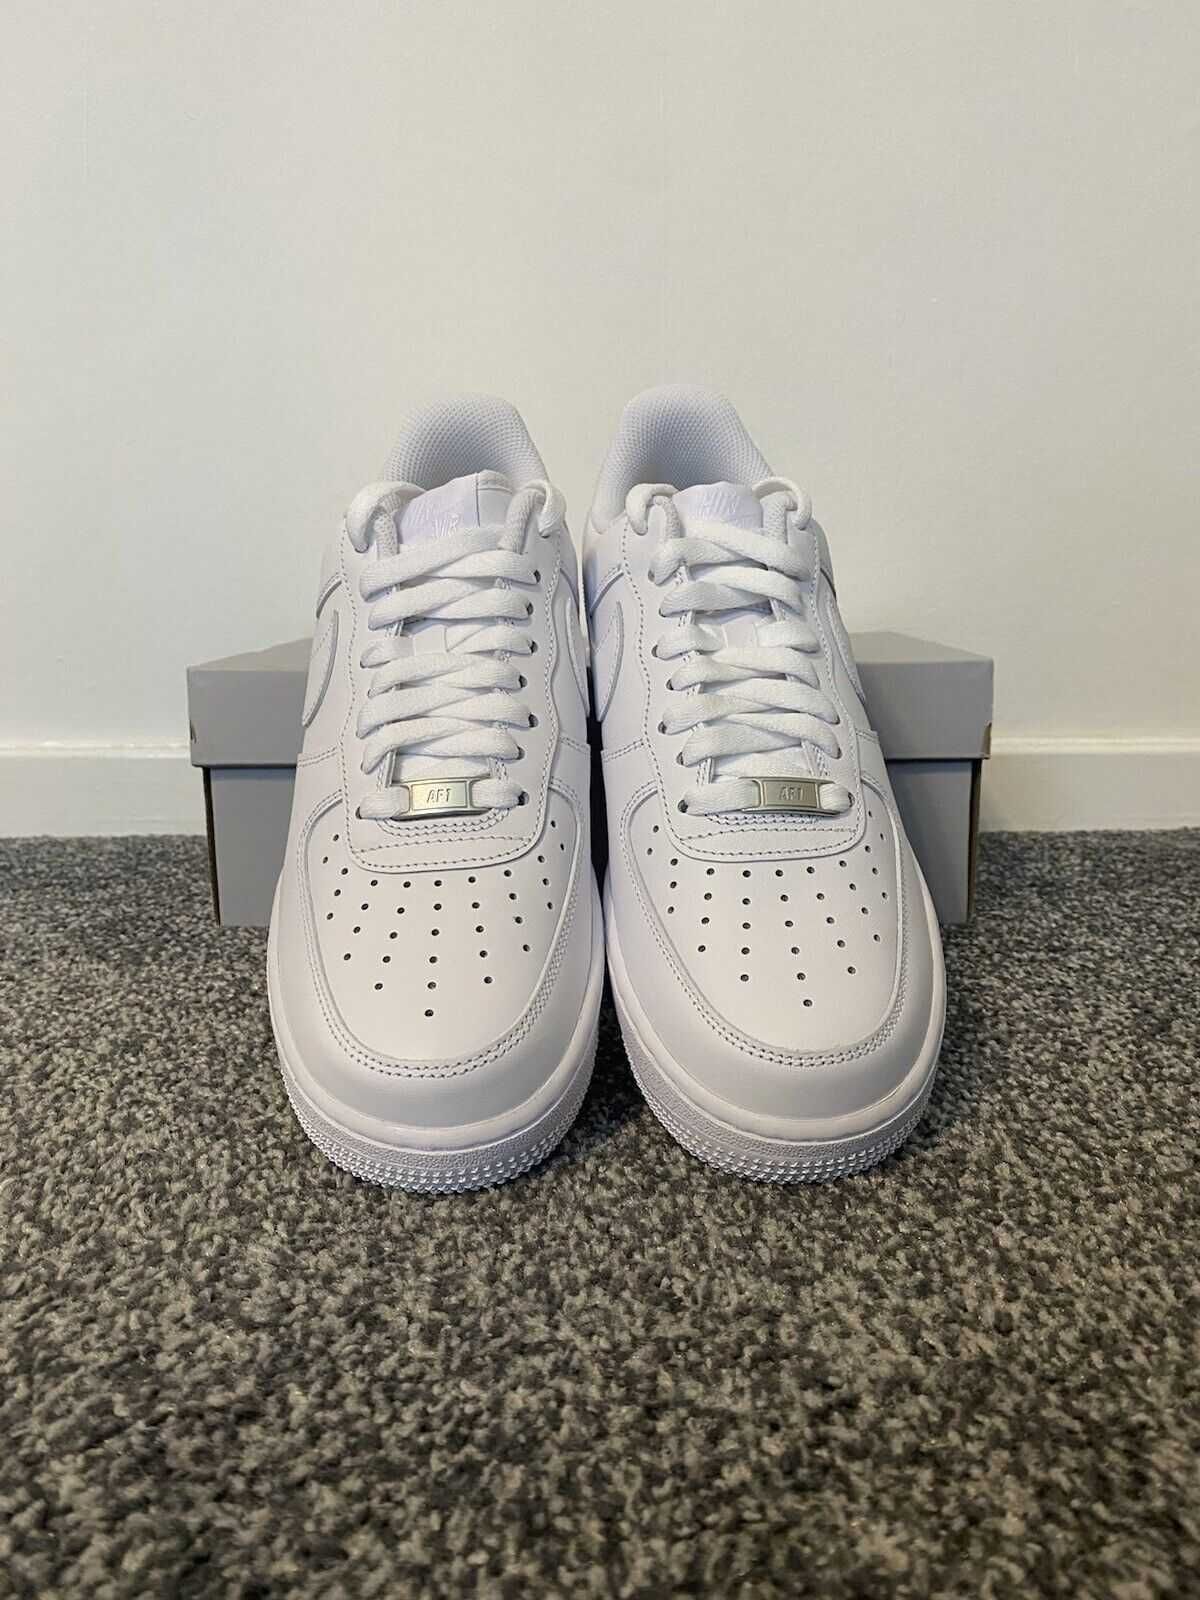 Nike Air Force 1 Low White| Adidasi| Reducere